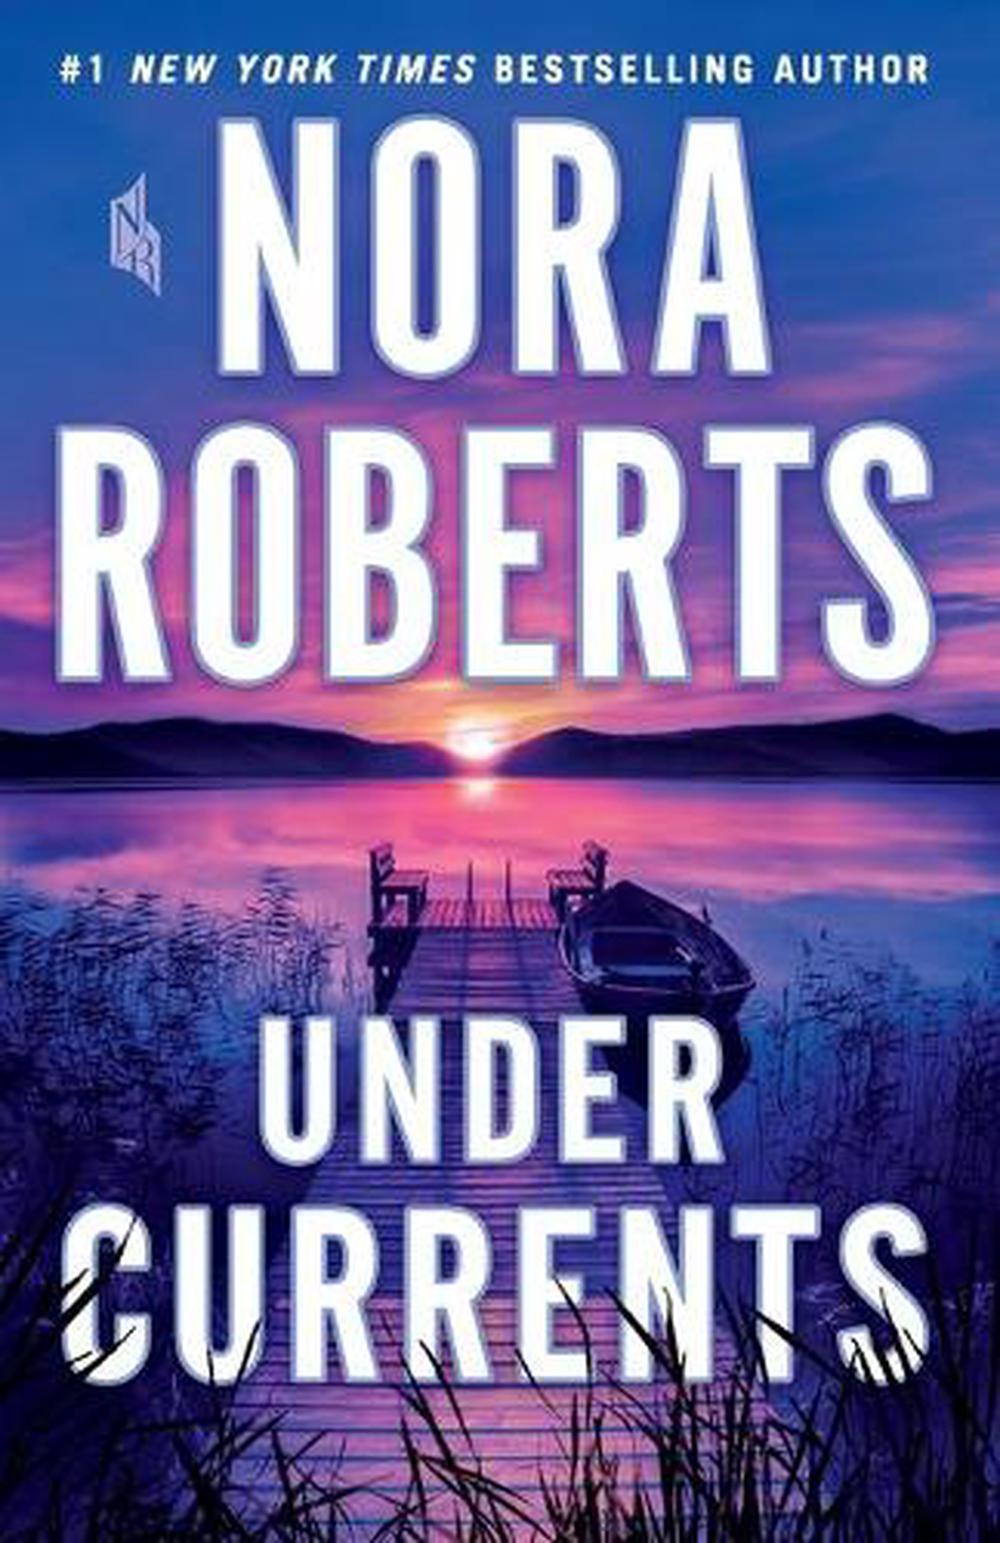 Under Currents: A Novel by Nora Roberts (English) Paperback Book Free ...